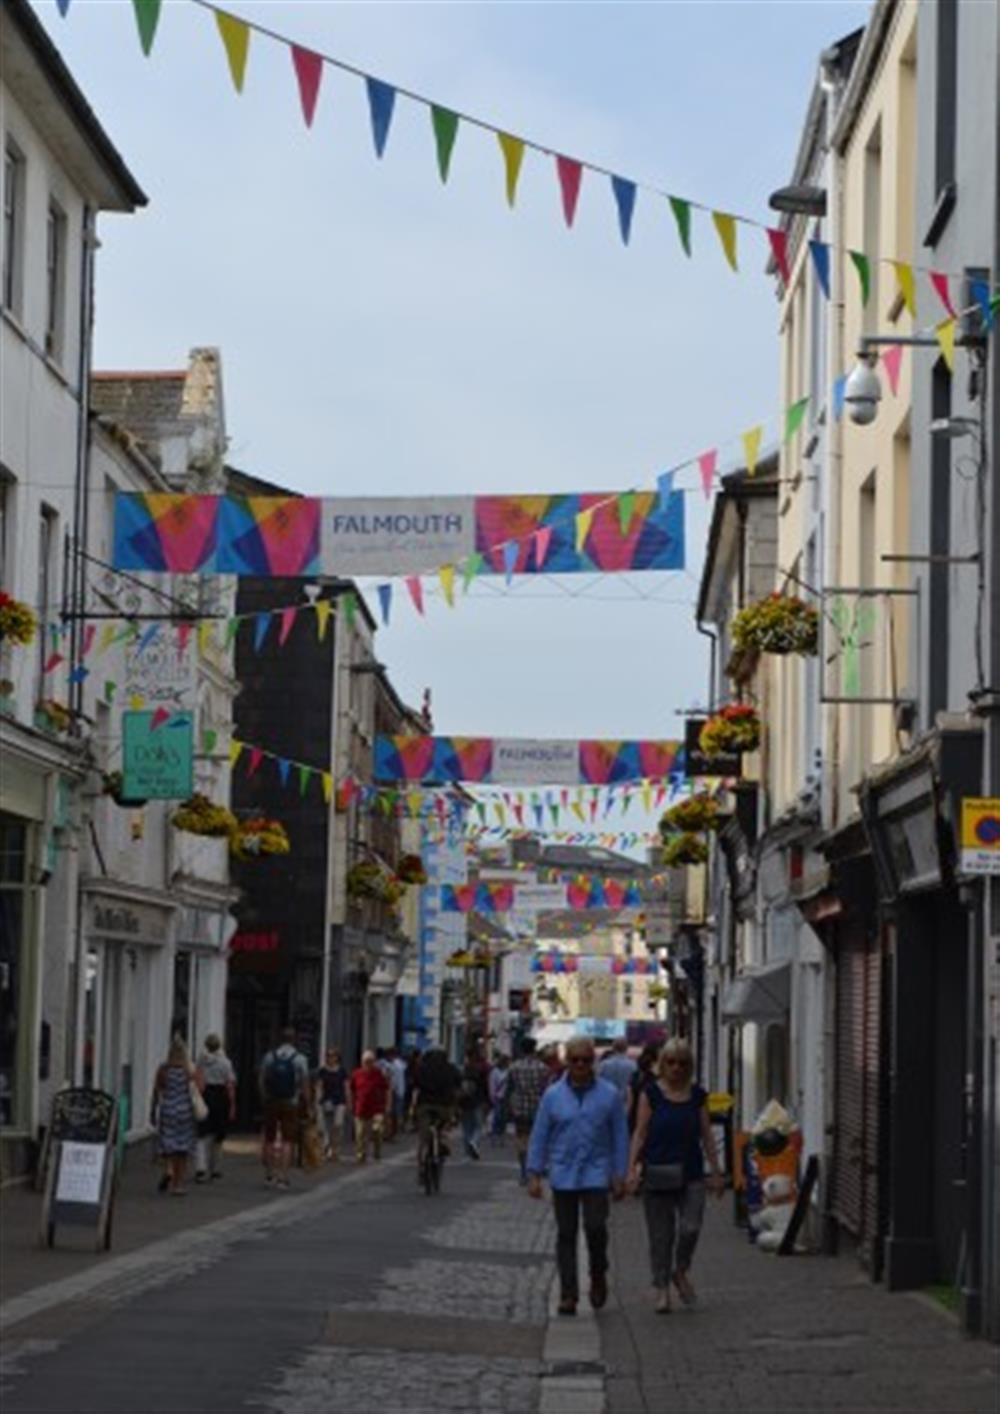 Falmouth town has all the usual shops, plus a range of restaurants, cafes and art galleries.